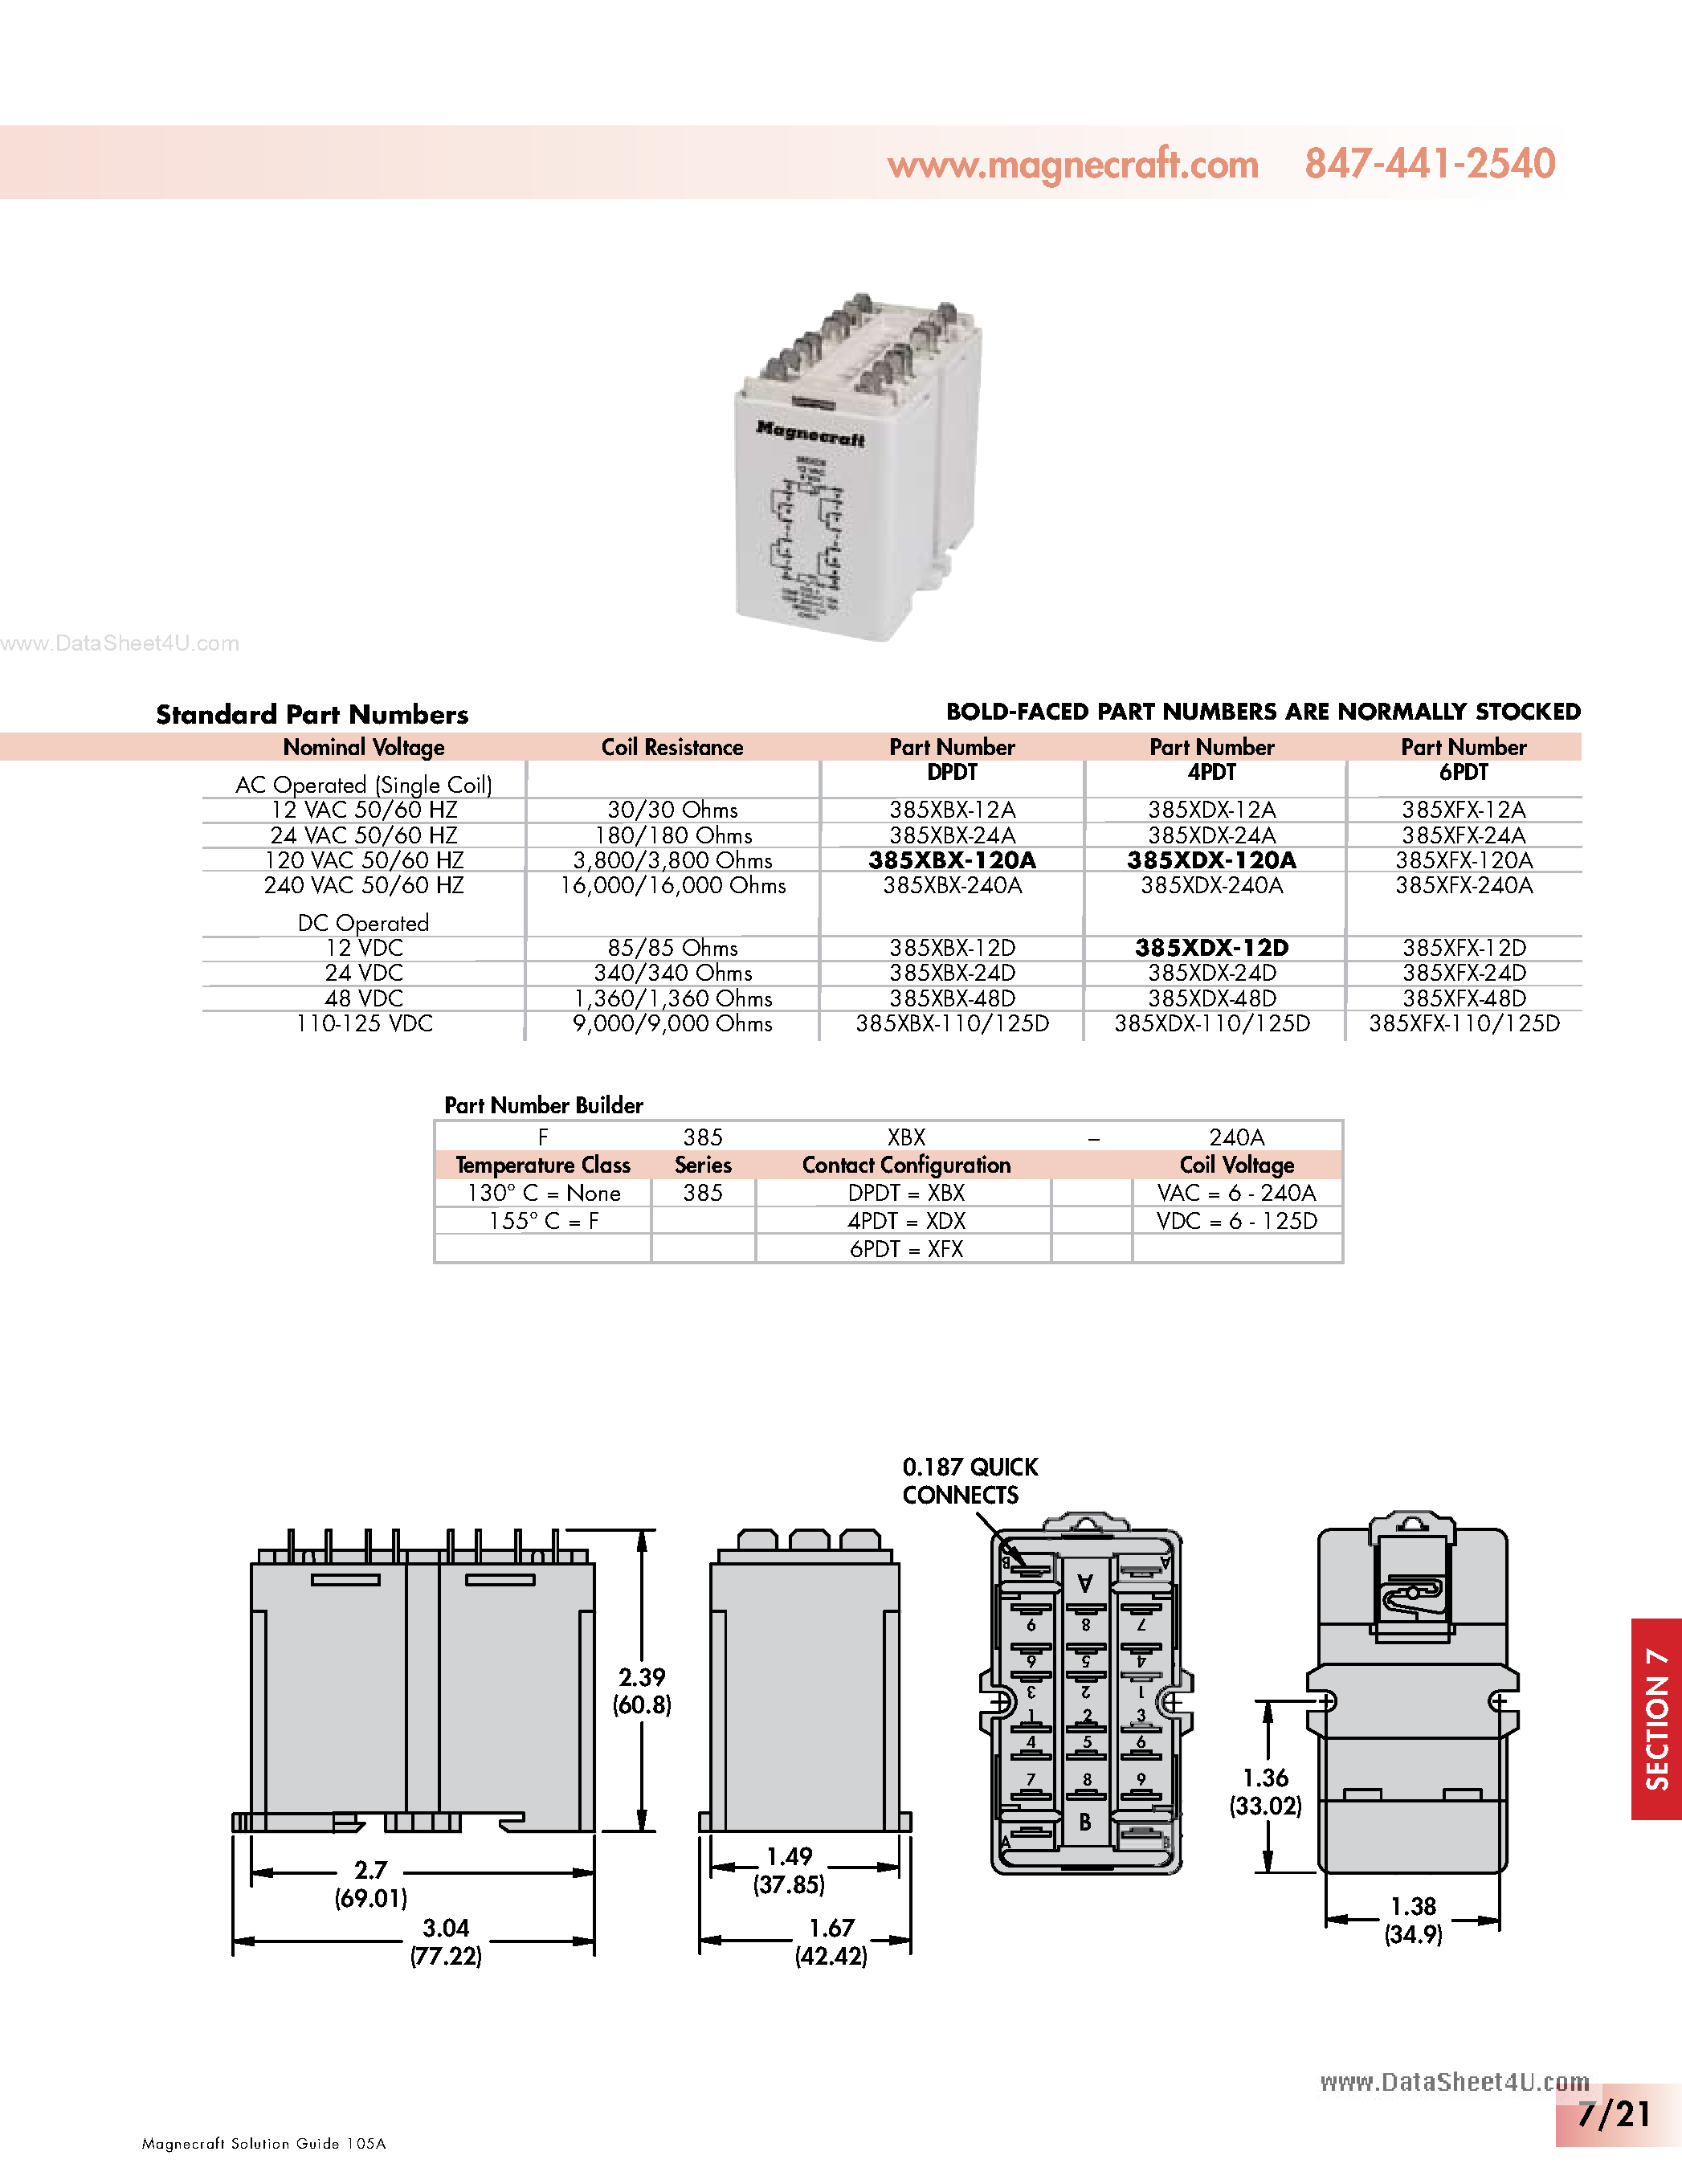 Datasheet 385XBX-110/125D - Bold Faced Part Numbers Are Normally Stocked page 2